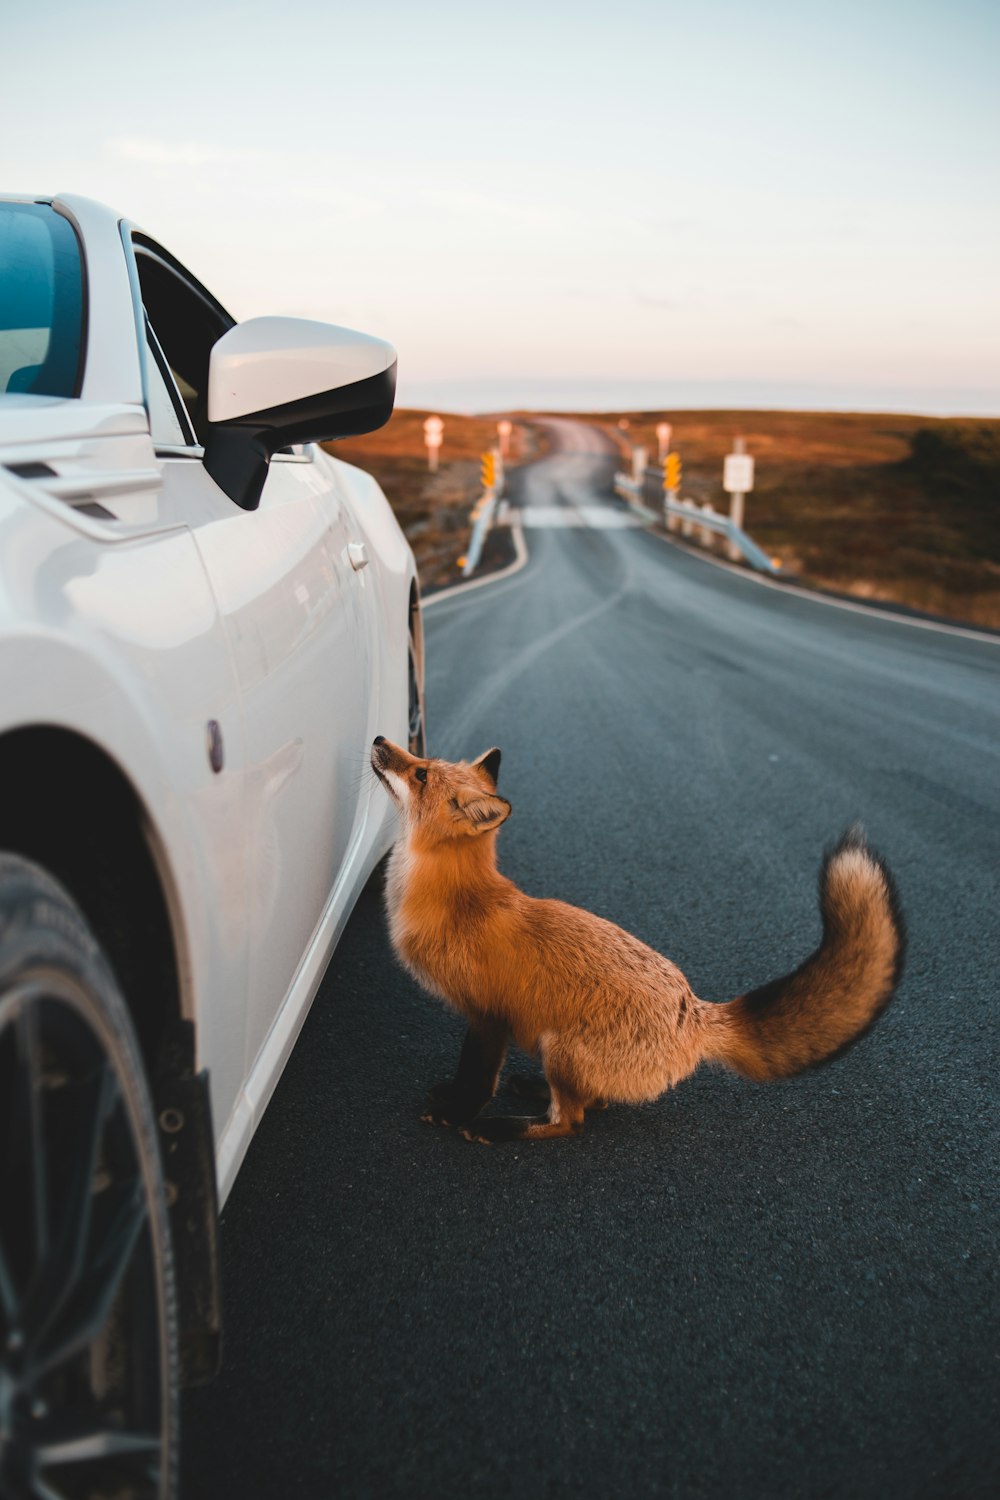 a red fox sitting on the side of a road next to a white car